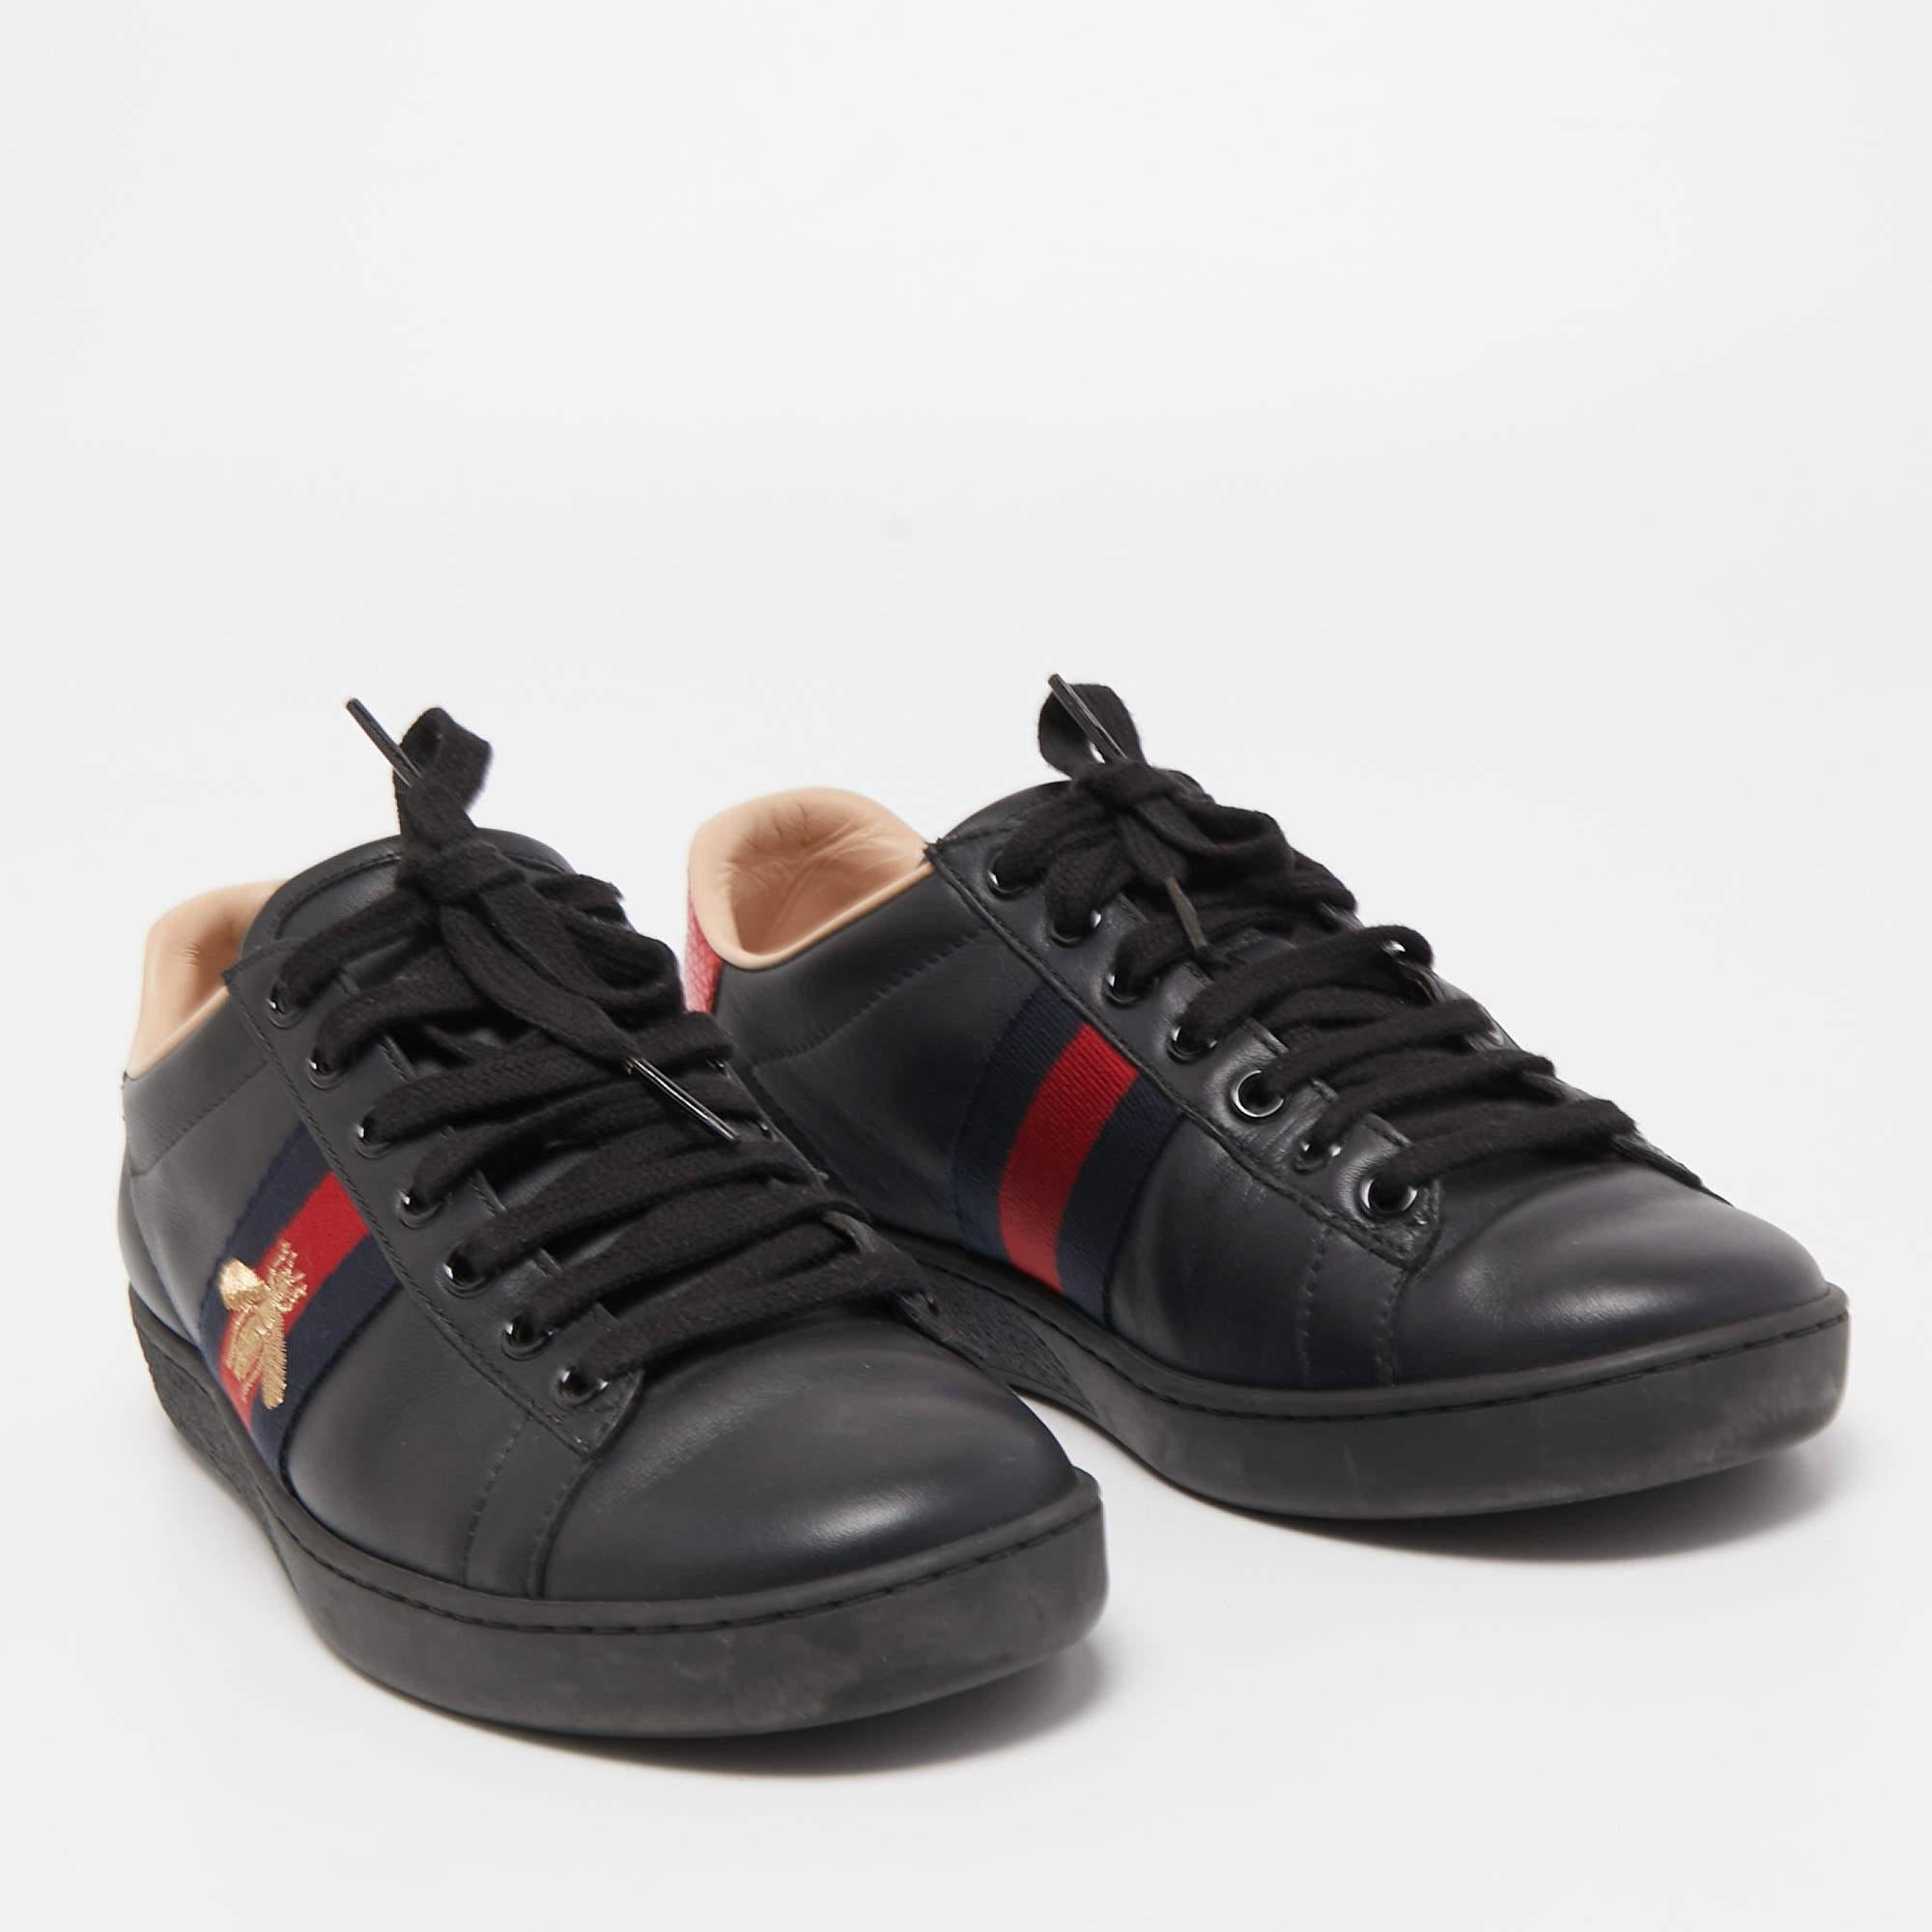 Gucci Black Leather Ace Web Low Top Sneakers Size 36 1